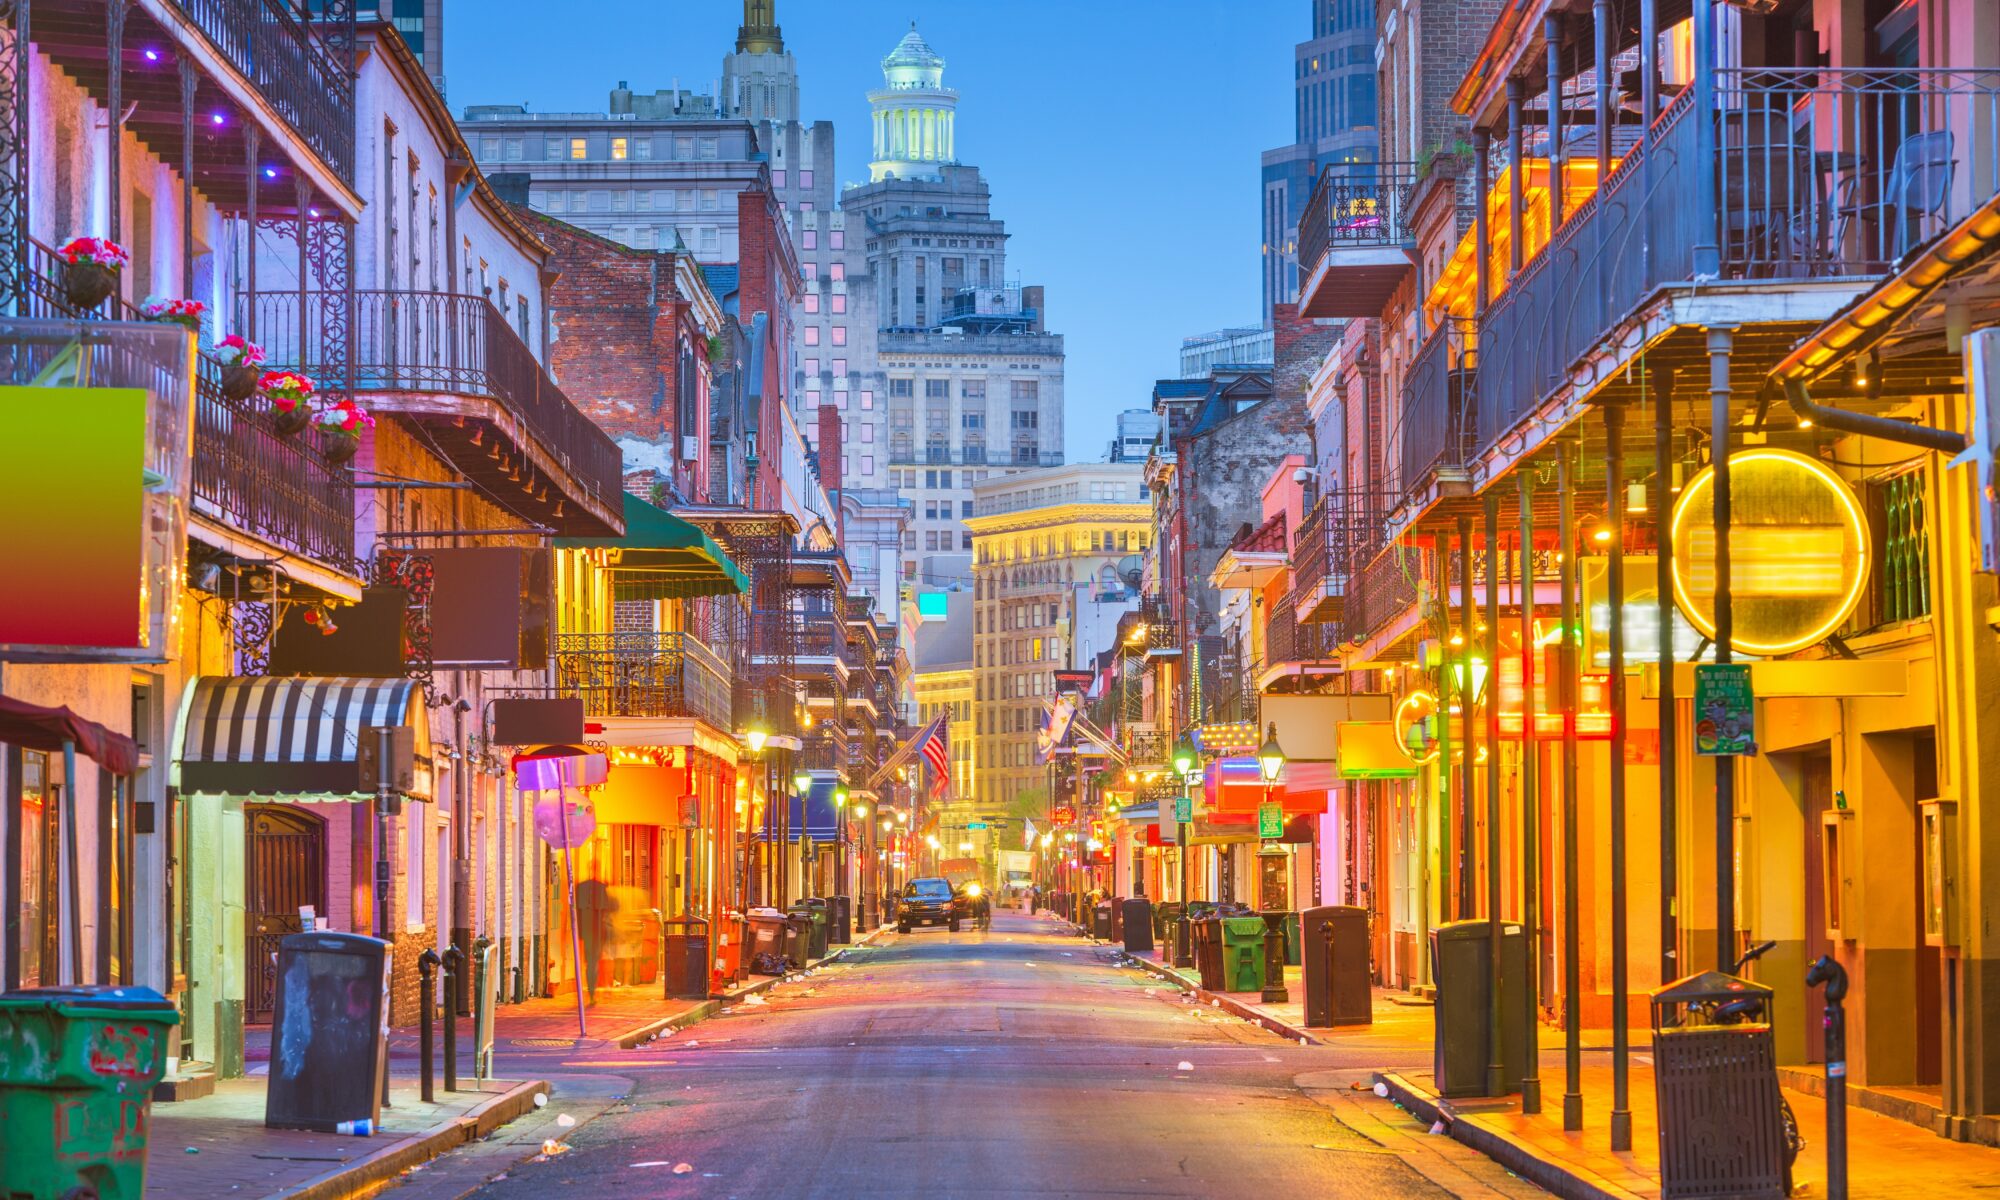 Hotels in New Orleans LA